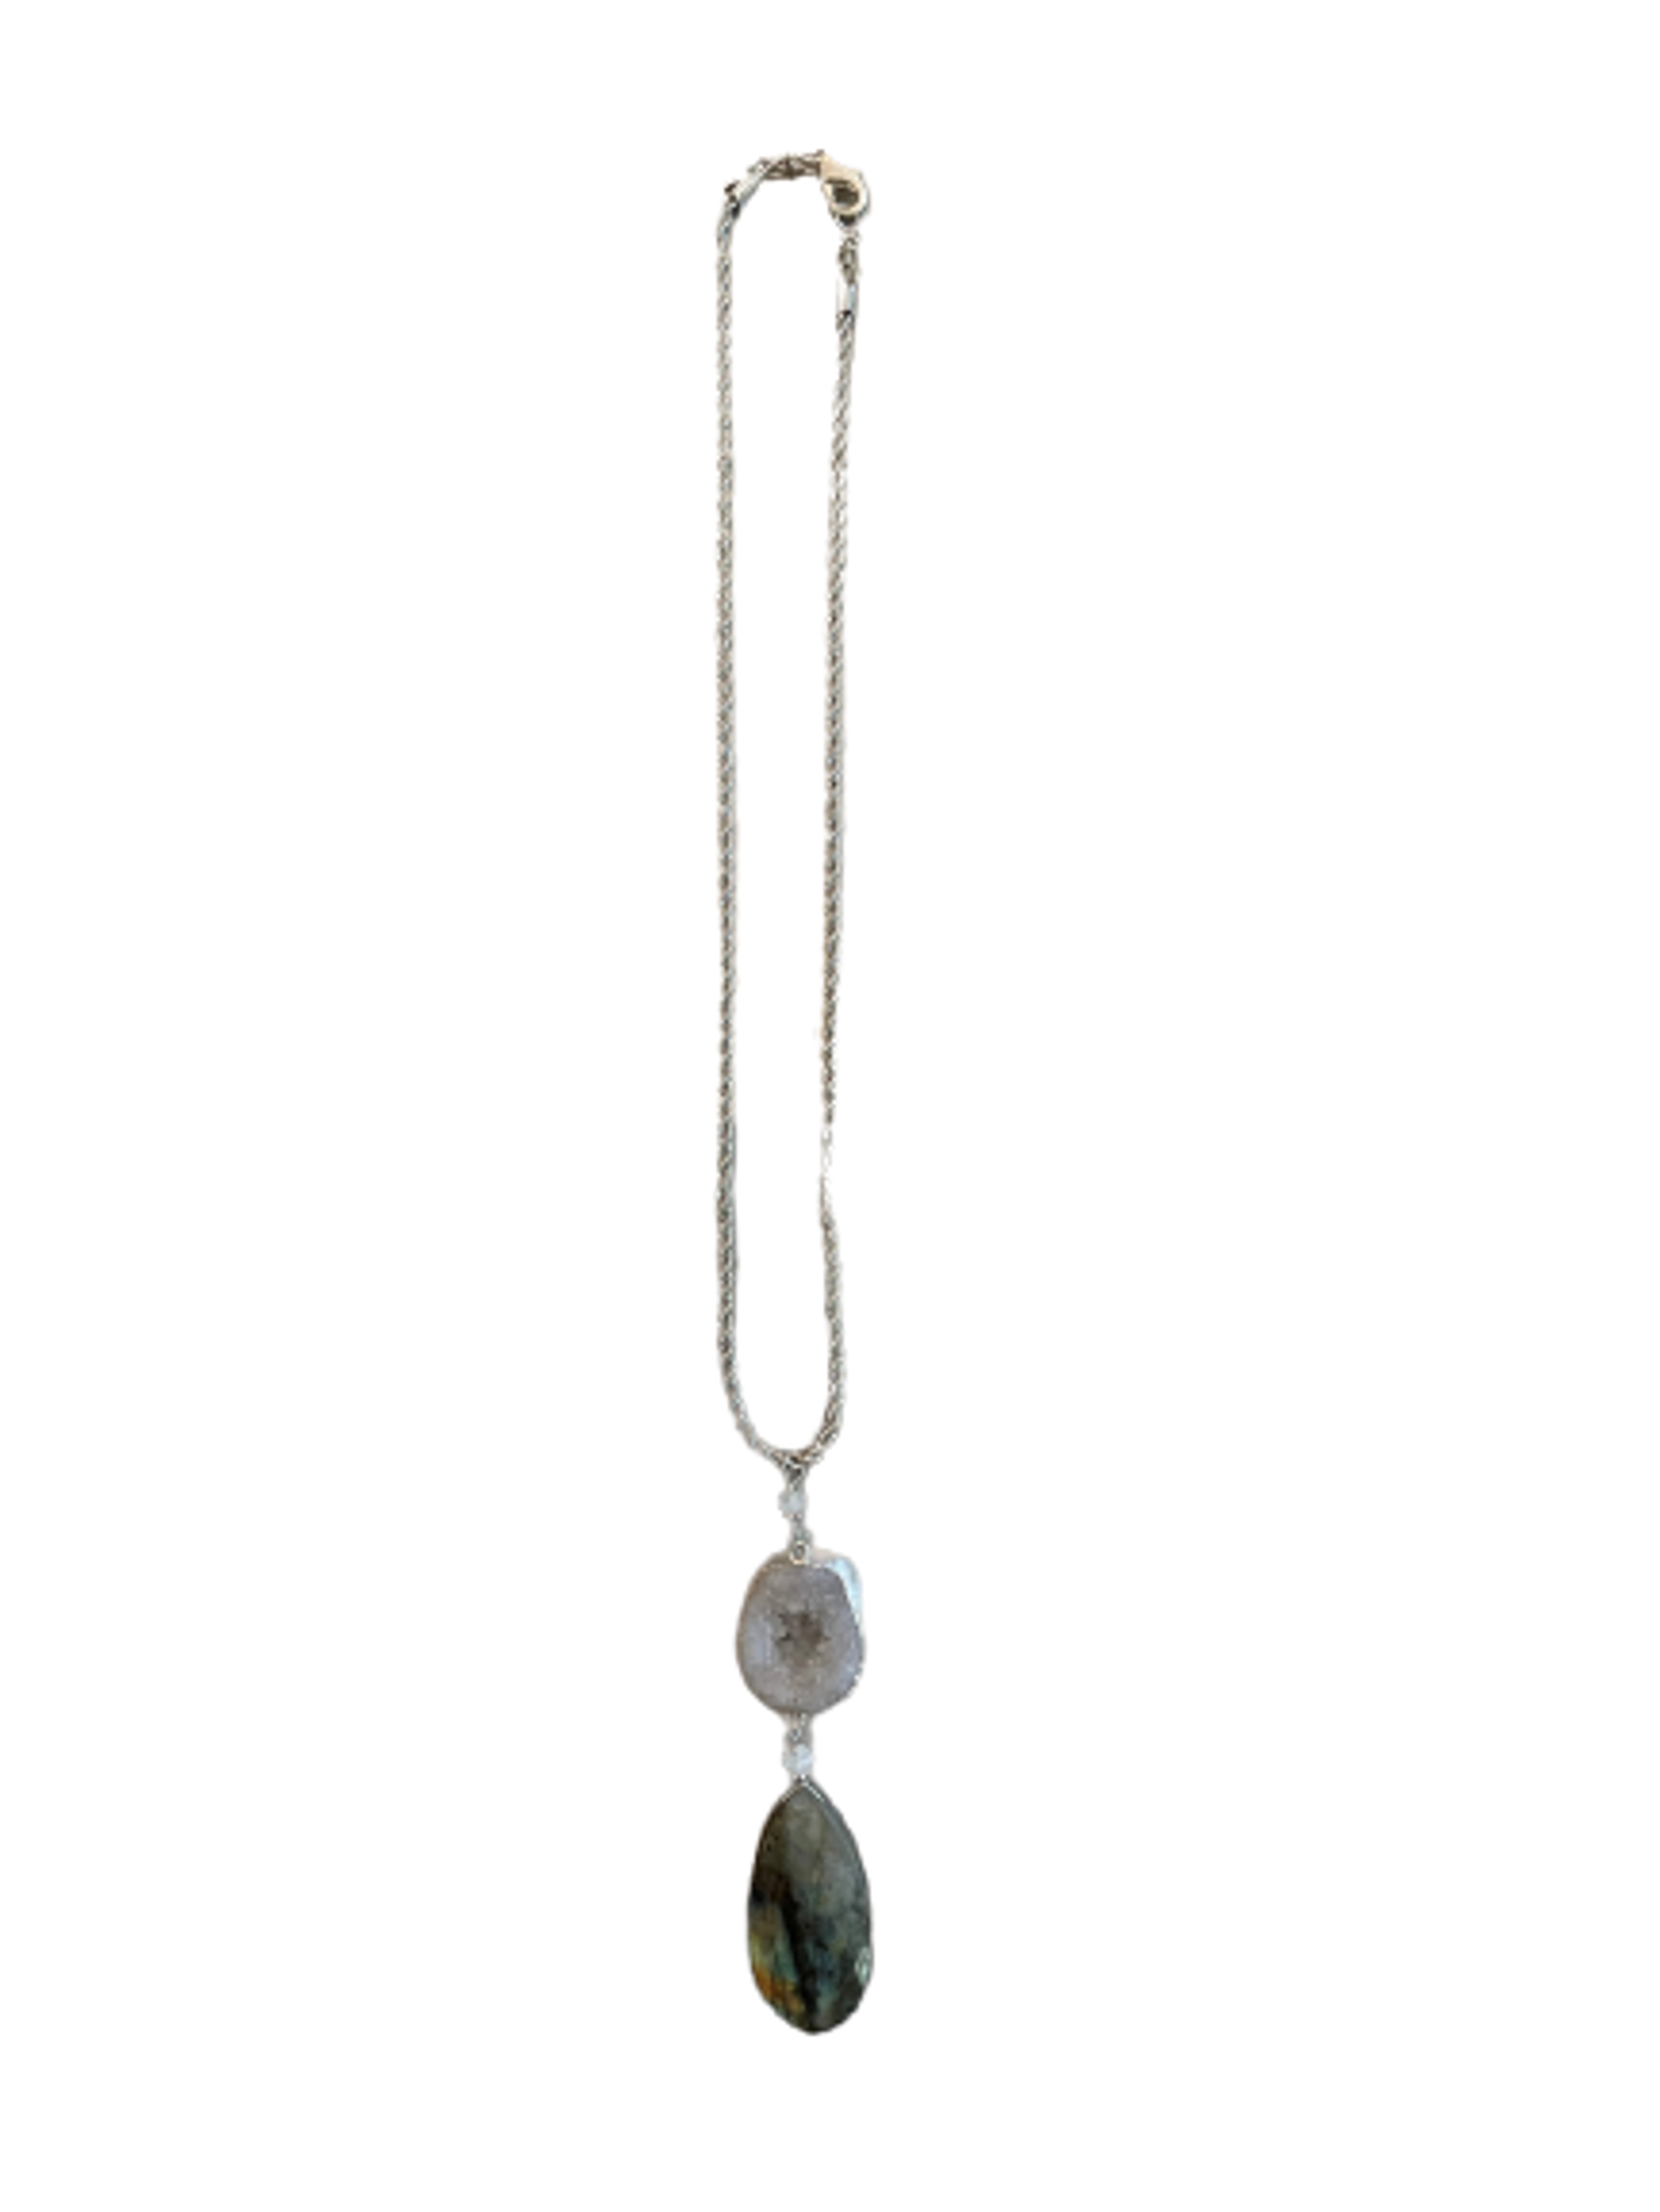 16” White Gold Filled Rope Chain with Sterling Electroplated White Geode & Labradorite Drop by ZinniaLou Jewelry